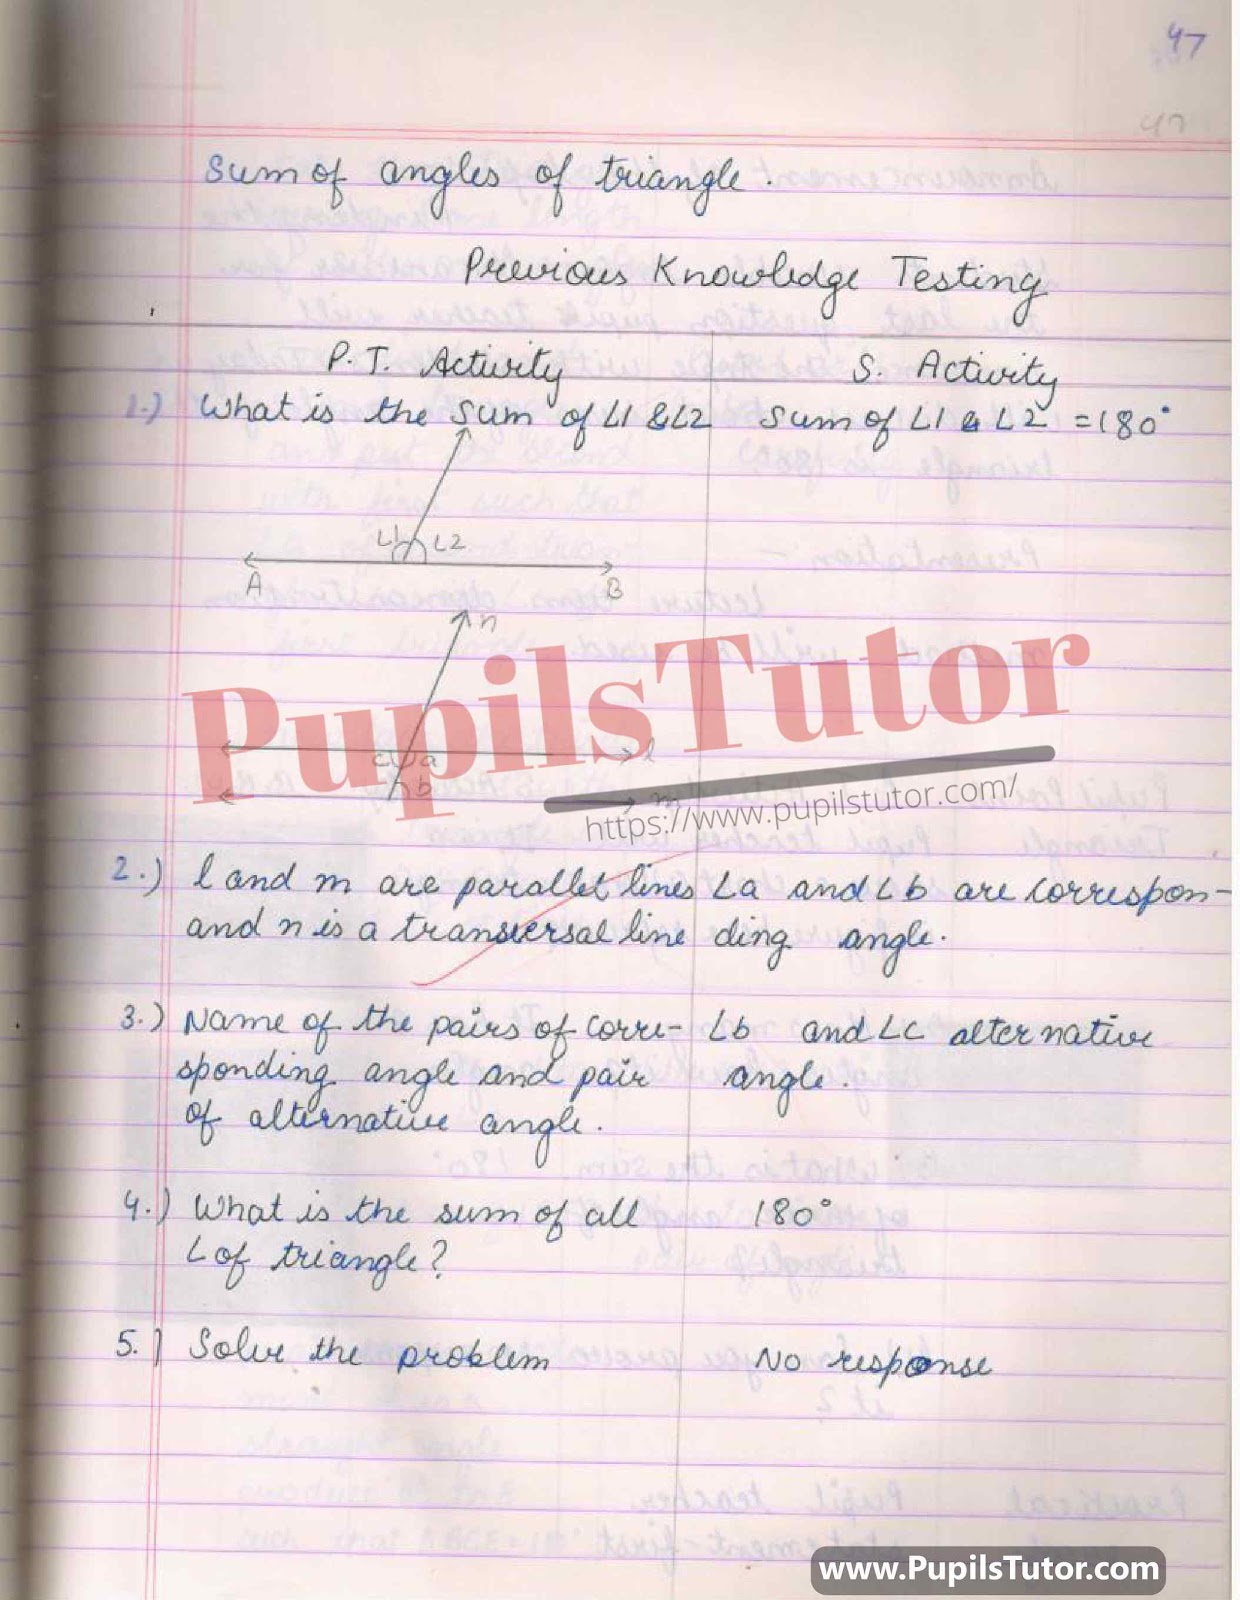 Class/Grade 10 Math Lesson Plan On Sum Of The Angles Of A Triangle For CBSE NCERT KVS School And University College Teachers – (Page And Image Number 3) – www.pupilstutor.com